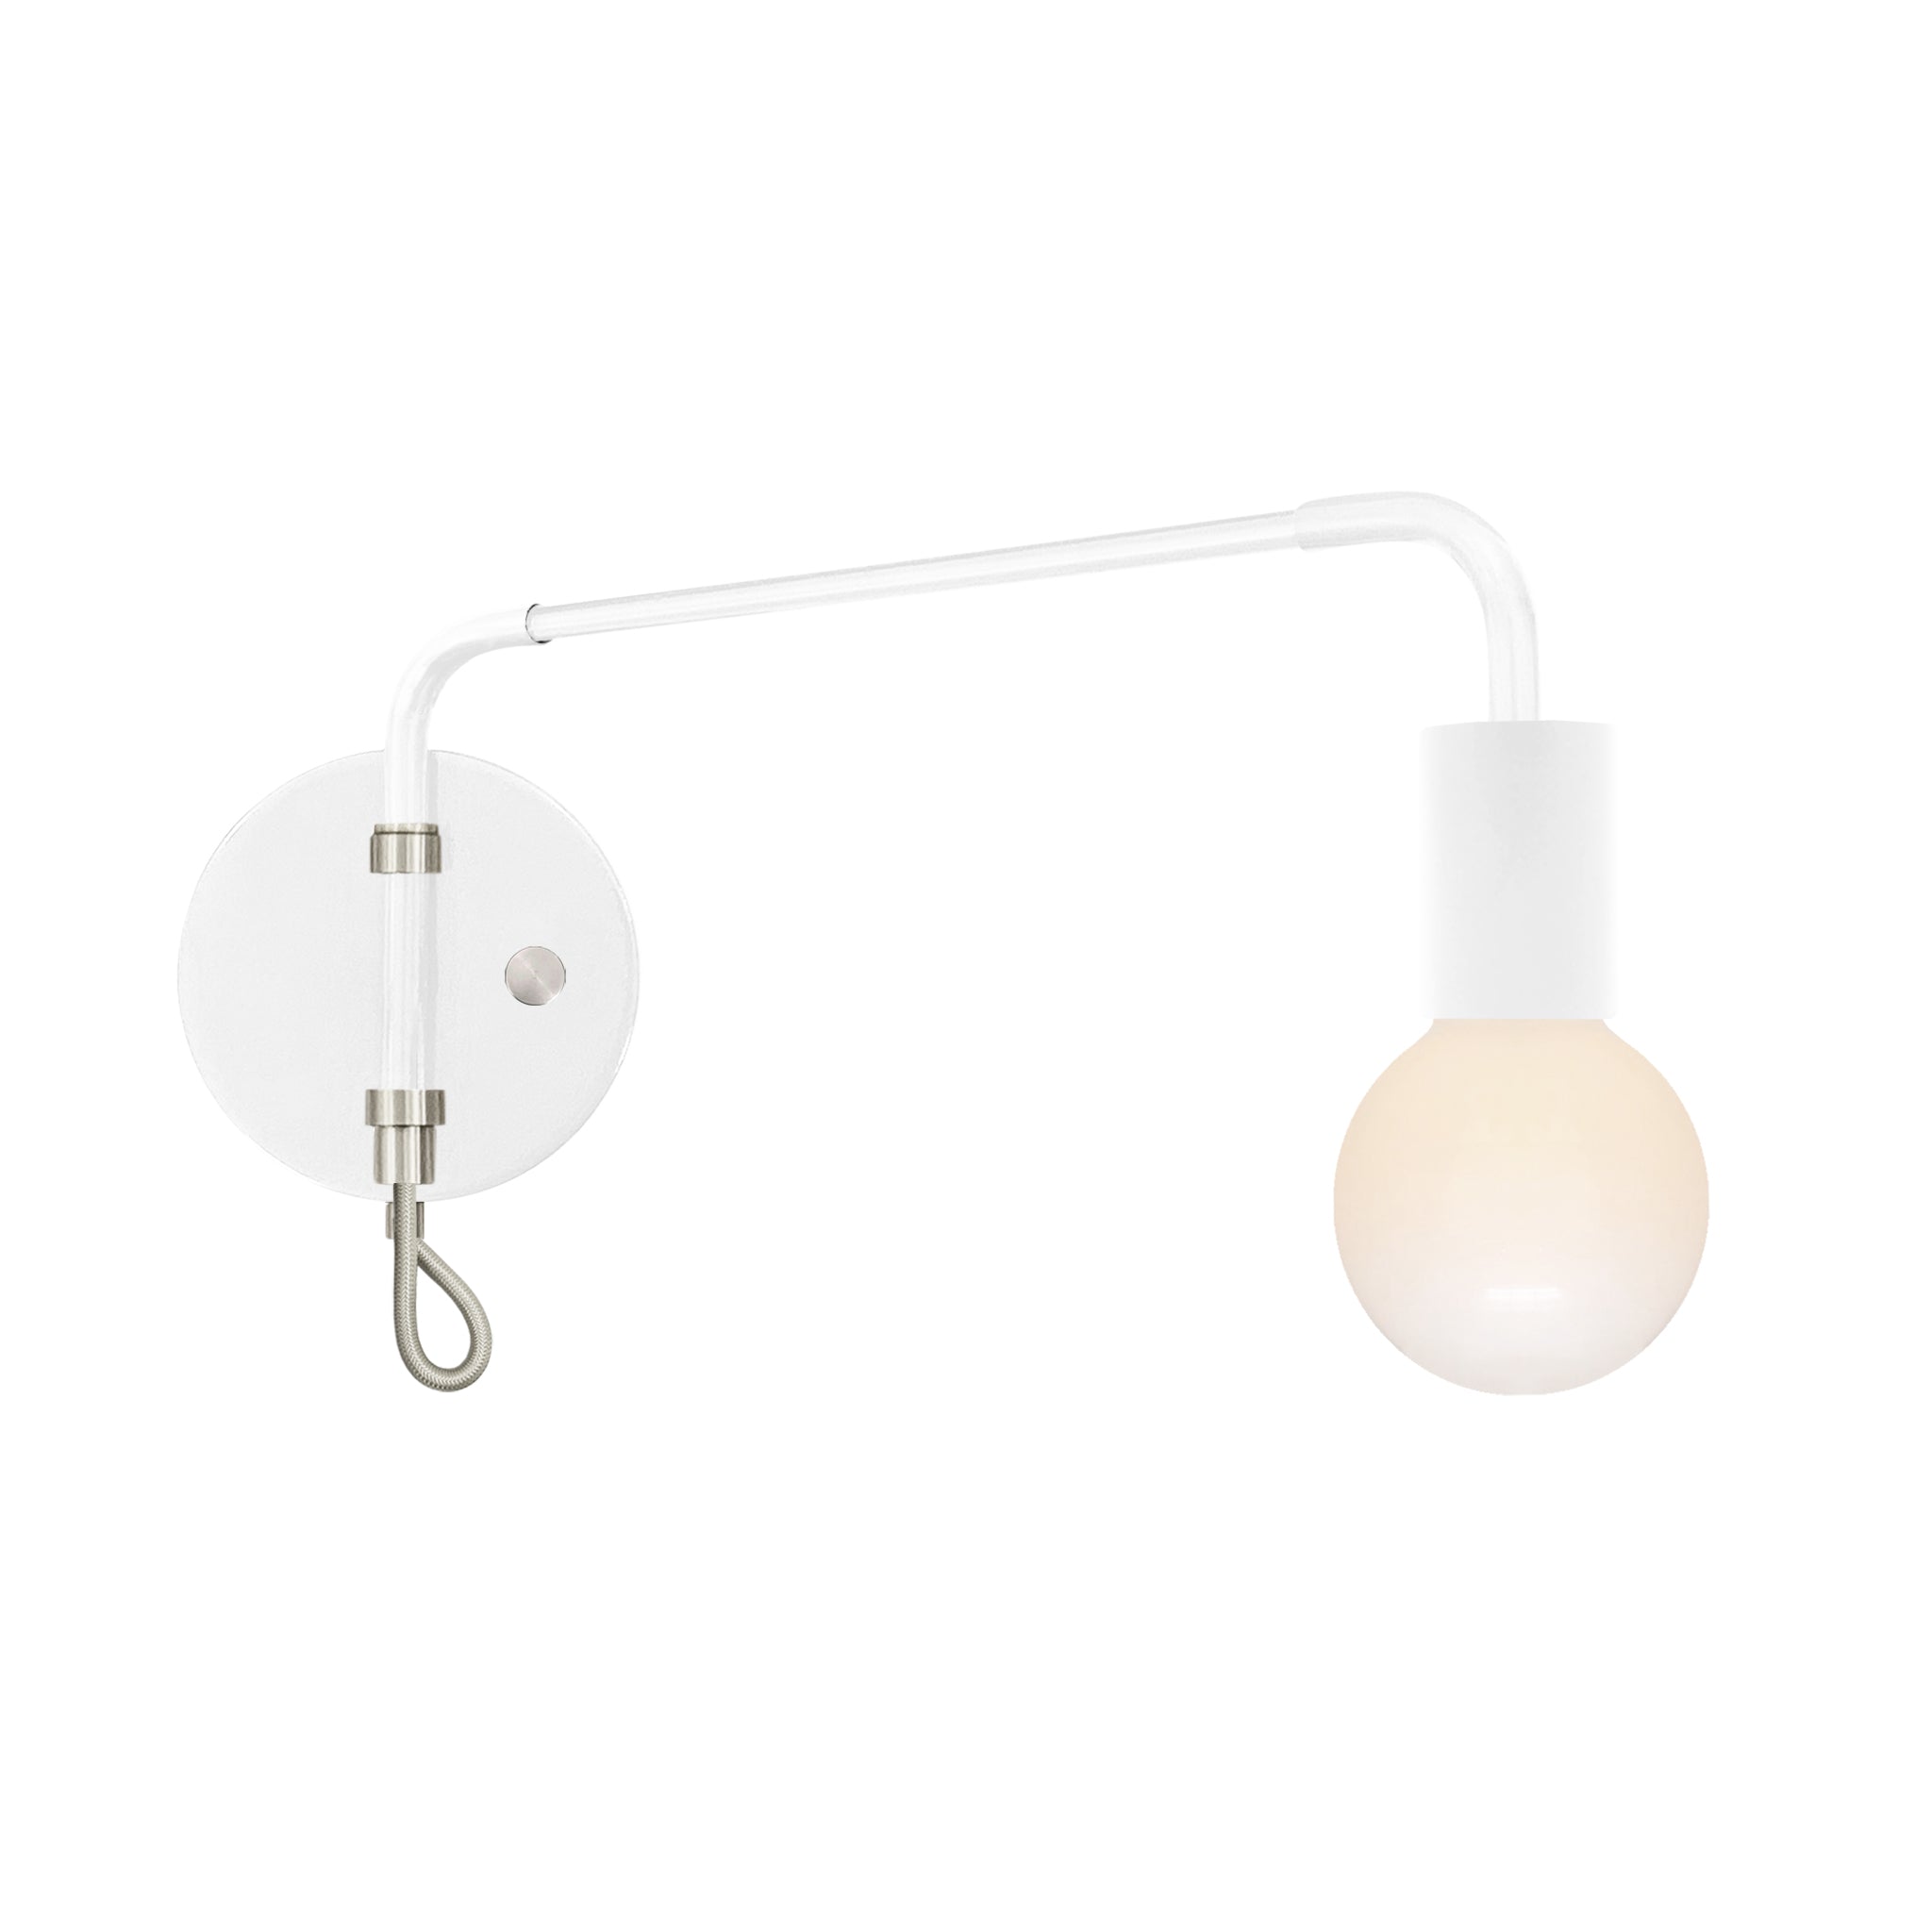 Nickel and white color Sway sconce Dutton Brown lighting